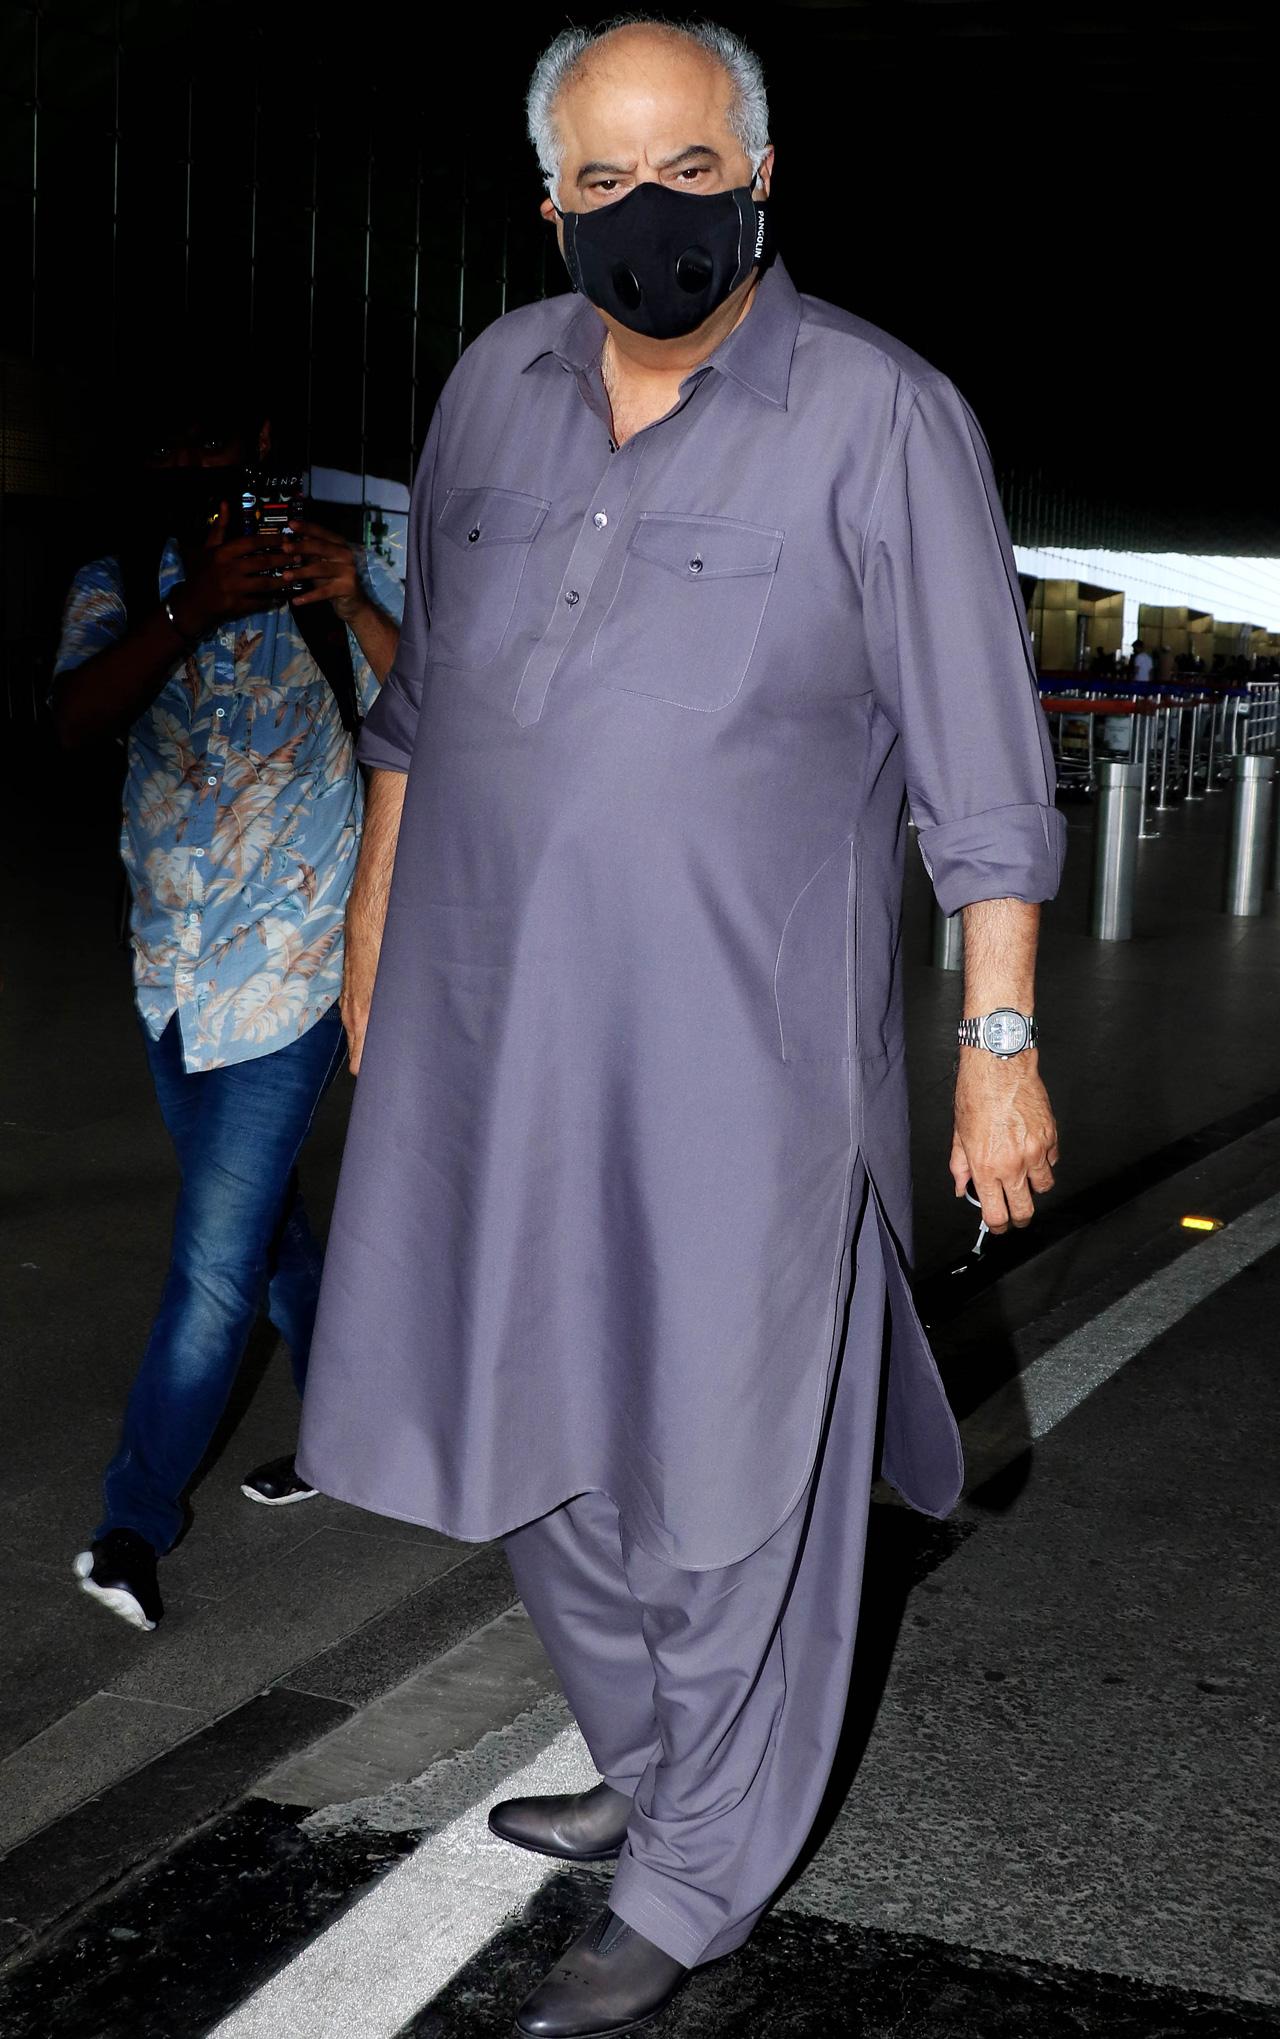 Boney Kapoor, who was recently seen in a cameo in brother Anil Kapoor's film AK vs AK (2020), will essay a full-fledged role in Luv Ranjan's yet-untitled next featuring Ranbir Kapoor and Shraddha Kapoor. He will play Ranbir's father in the romantic comedy. In picture: Boney Kapoor at the Mumbai airport